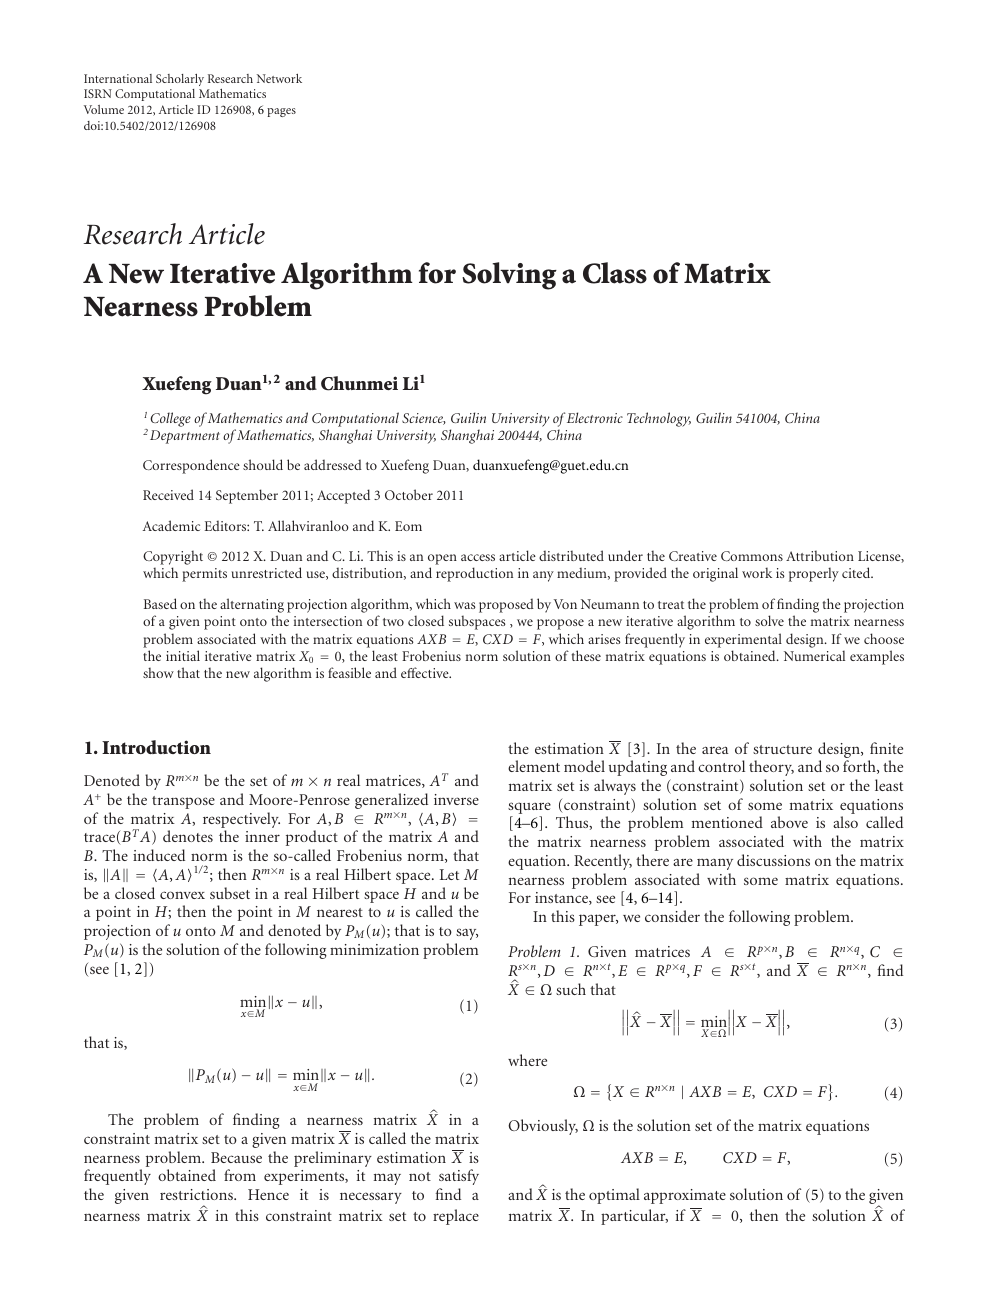 A New Iterative Algorithm For Solving A Class Of Matrix Nearness Problem Topic Of Research Paper In Mathematics Download Scholarly Article Pdf And Read For Free On Cyberleninka Open Science Hub